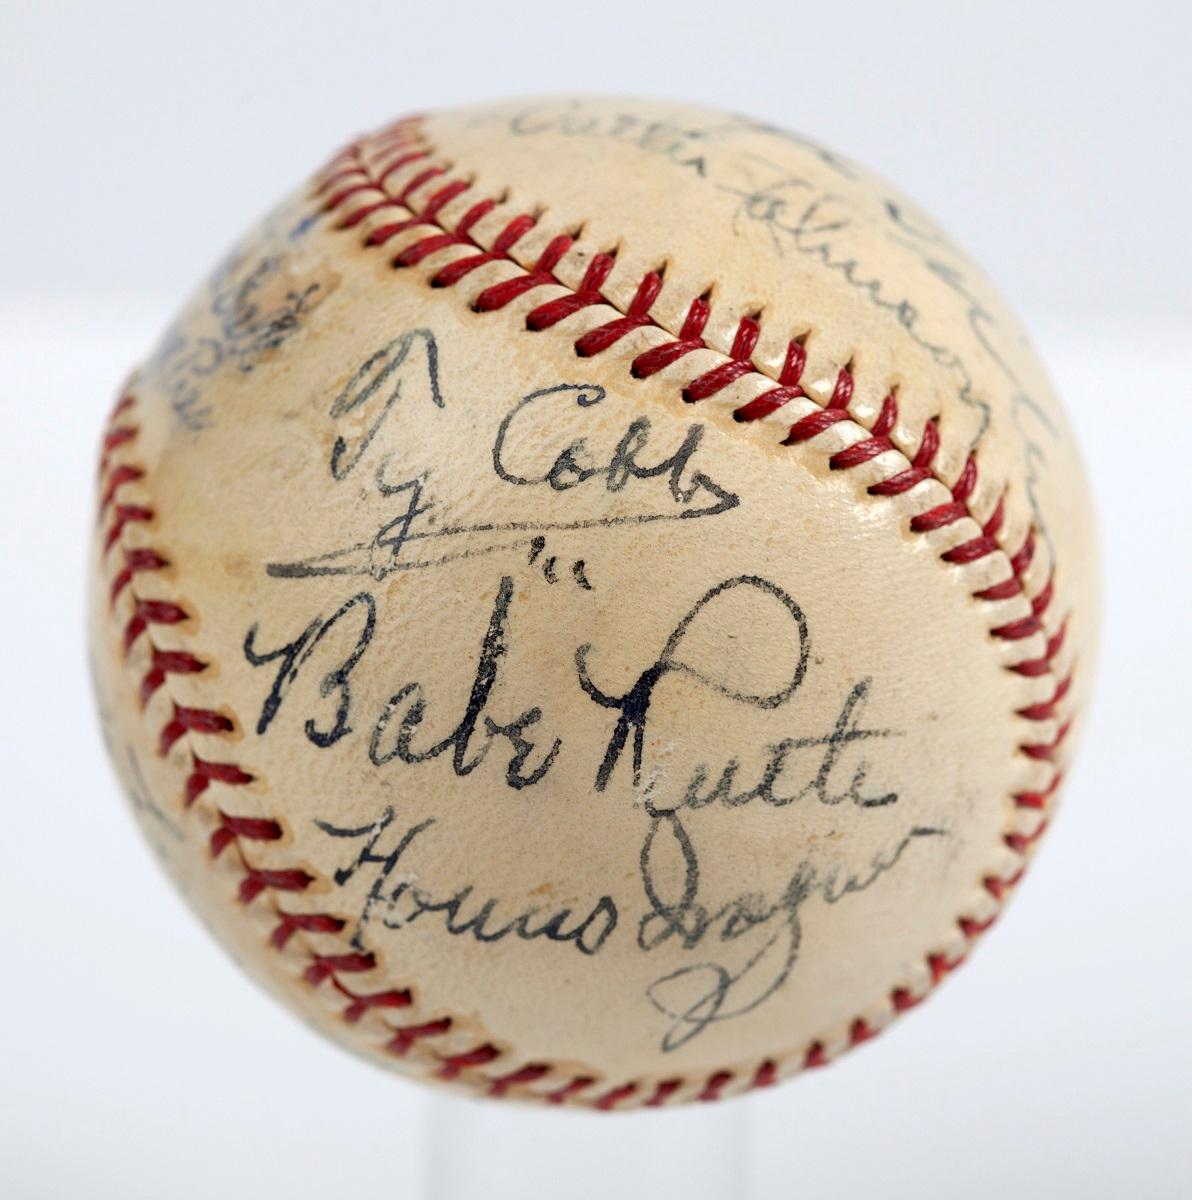 A baseball with the signatures of Babe Ruth, Ty Cobb, Honus Wagner and eight other legends of the game that has sold for more than $600,000 SCP Auctions said on Aug. 13, 2018. (SCP Auctions/AP)